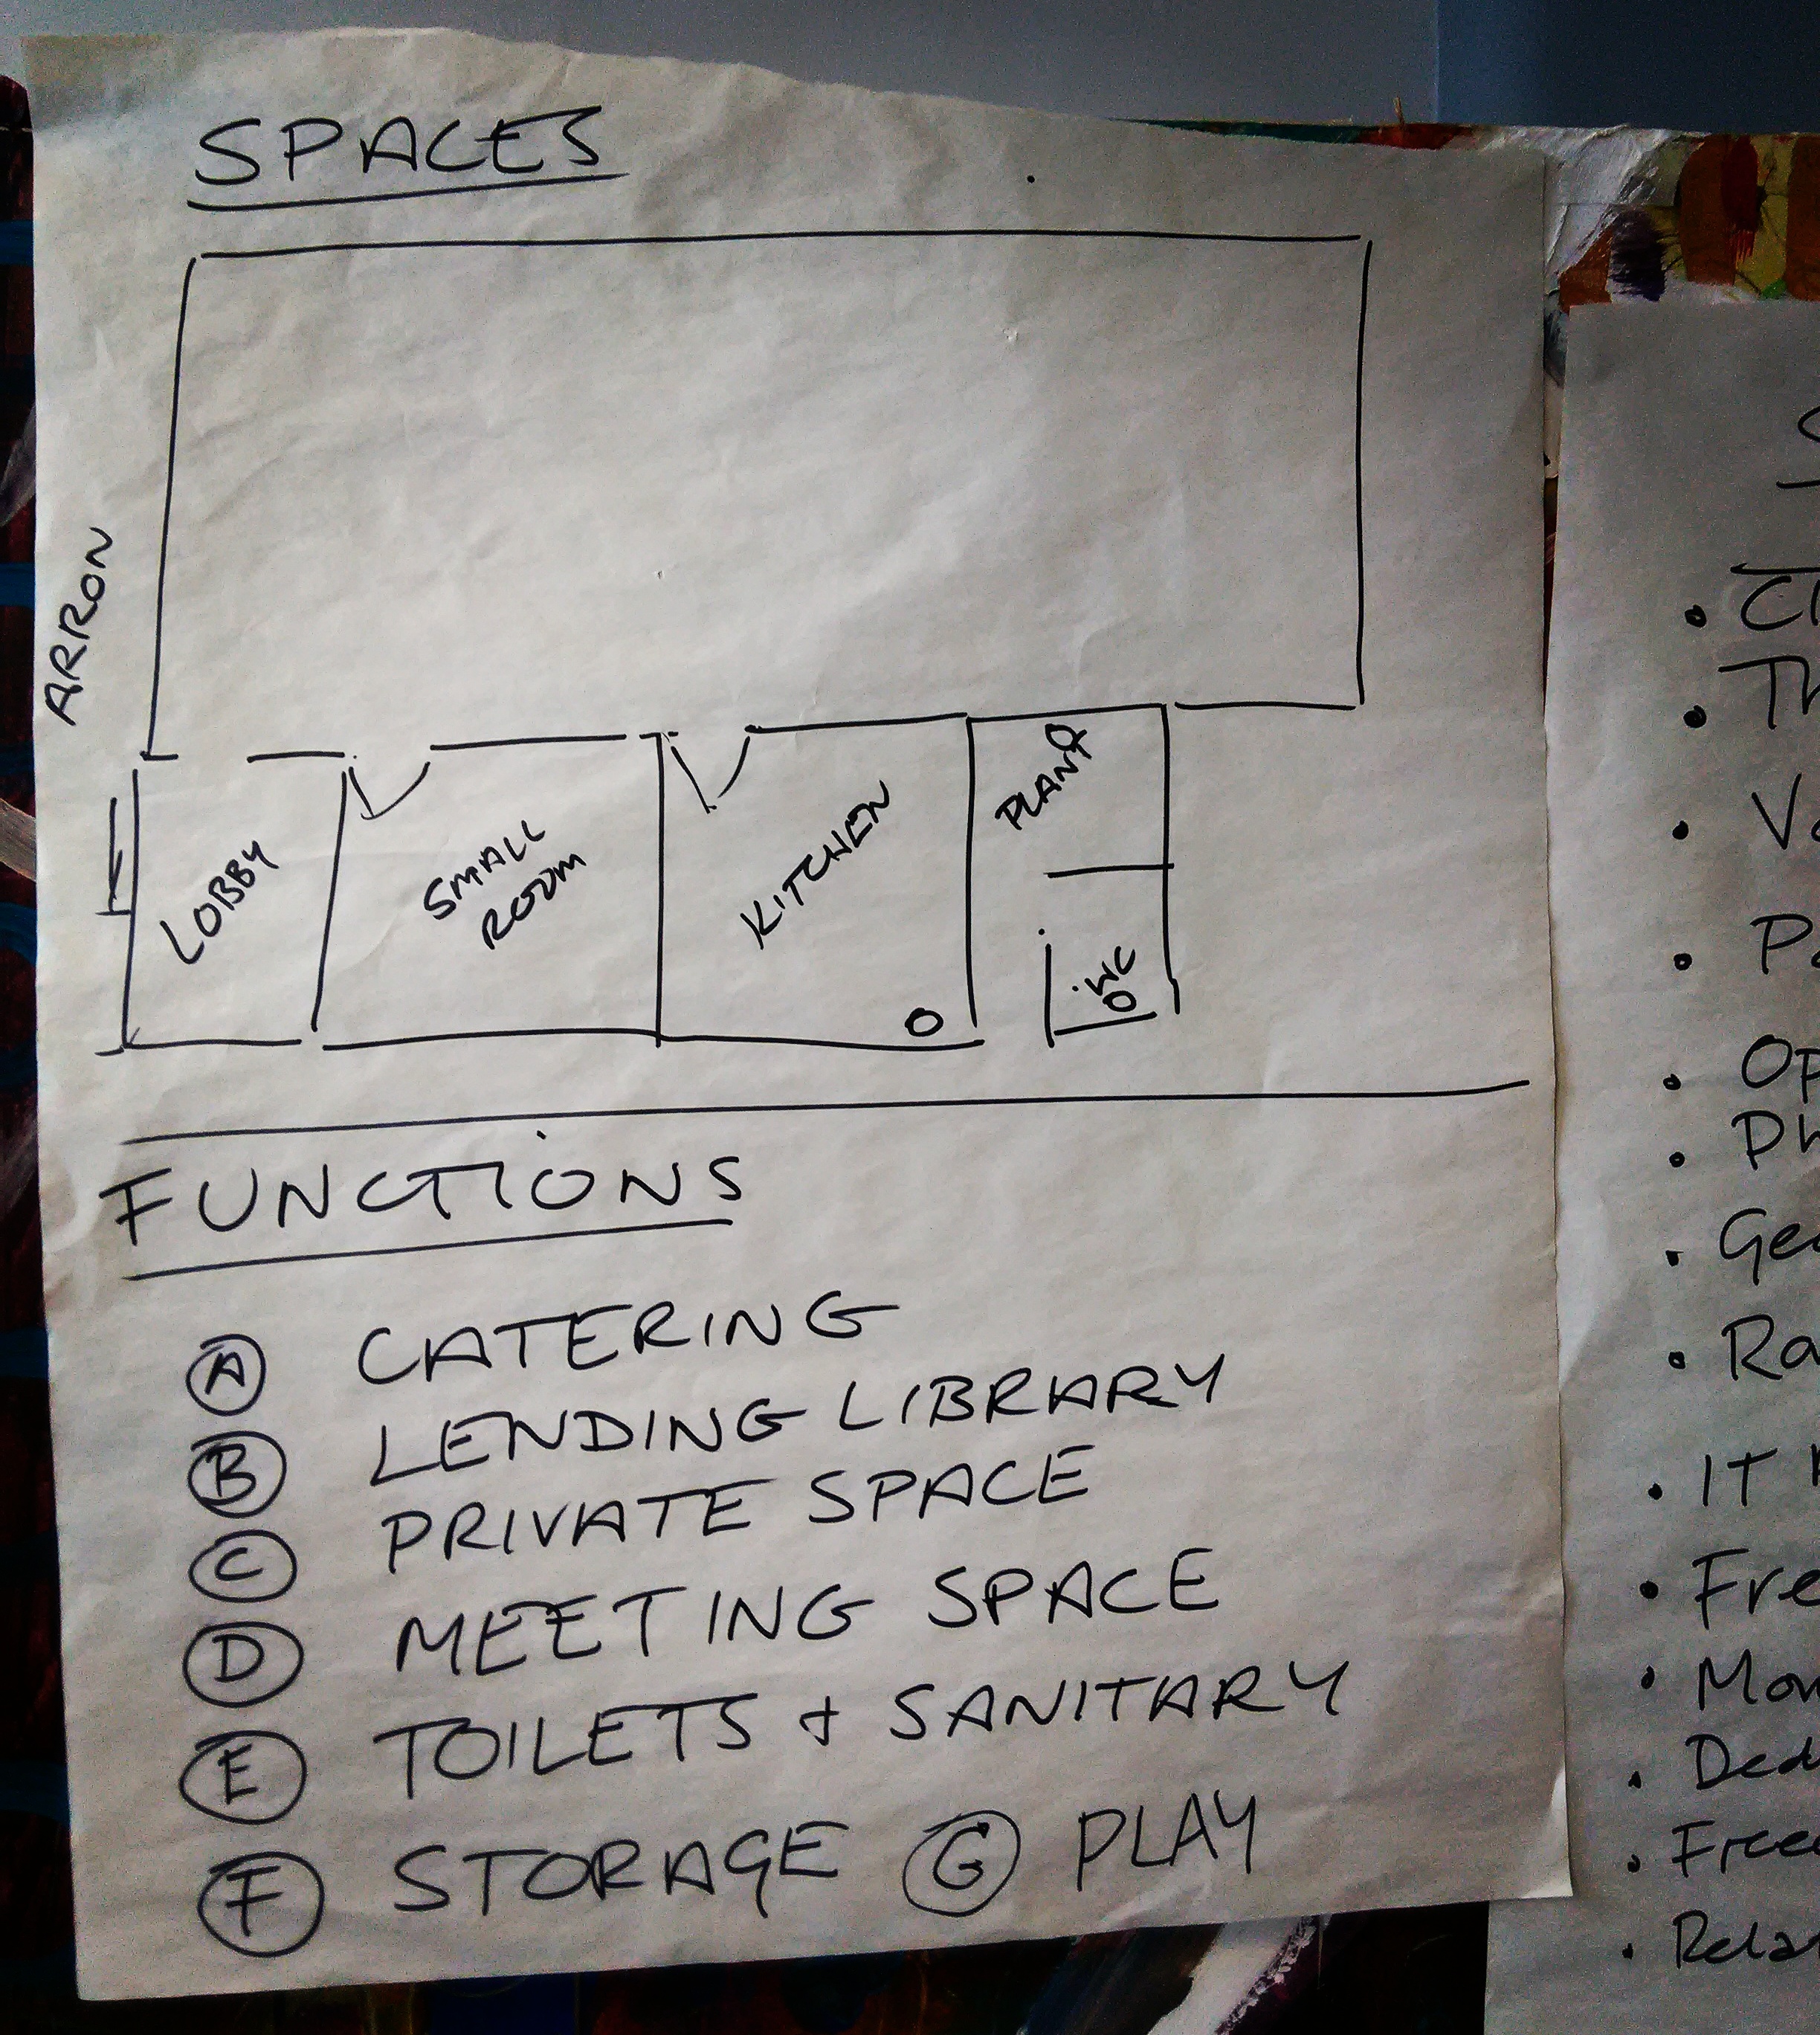 Library spaces and functions